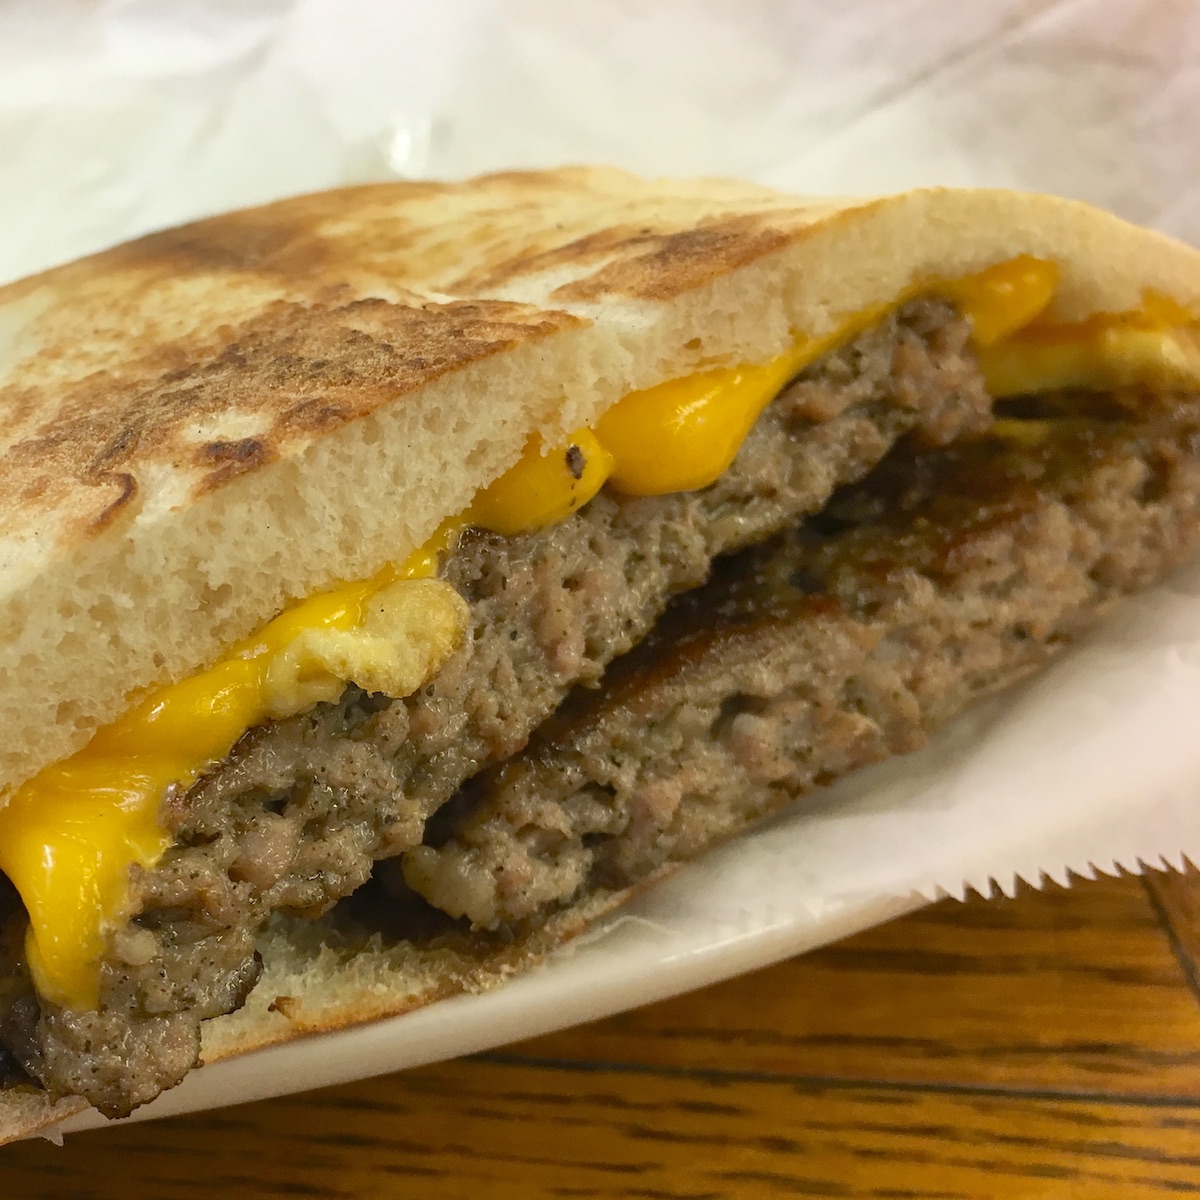 Egg, Cheese and Sausage on Pita from Pinegrove Market and Deli in Jacksonville, Florida